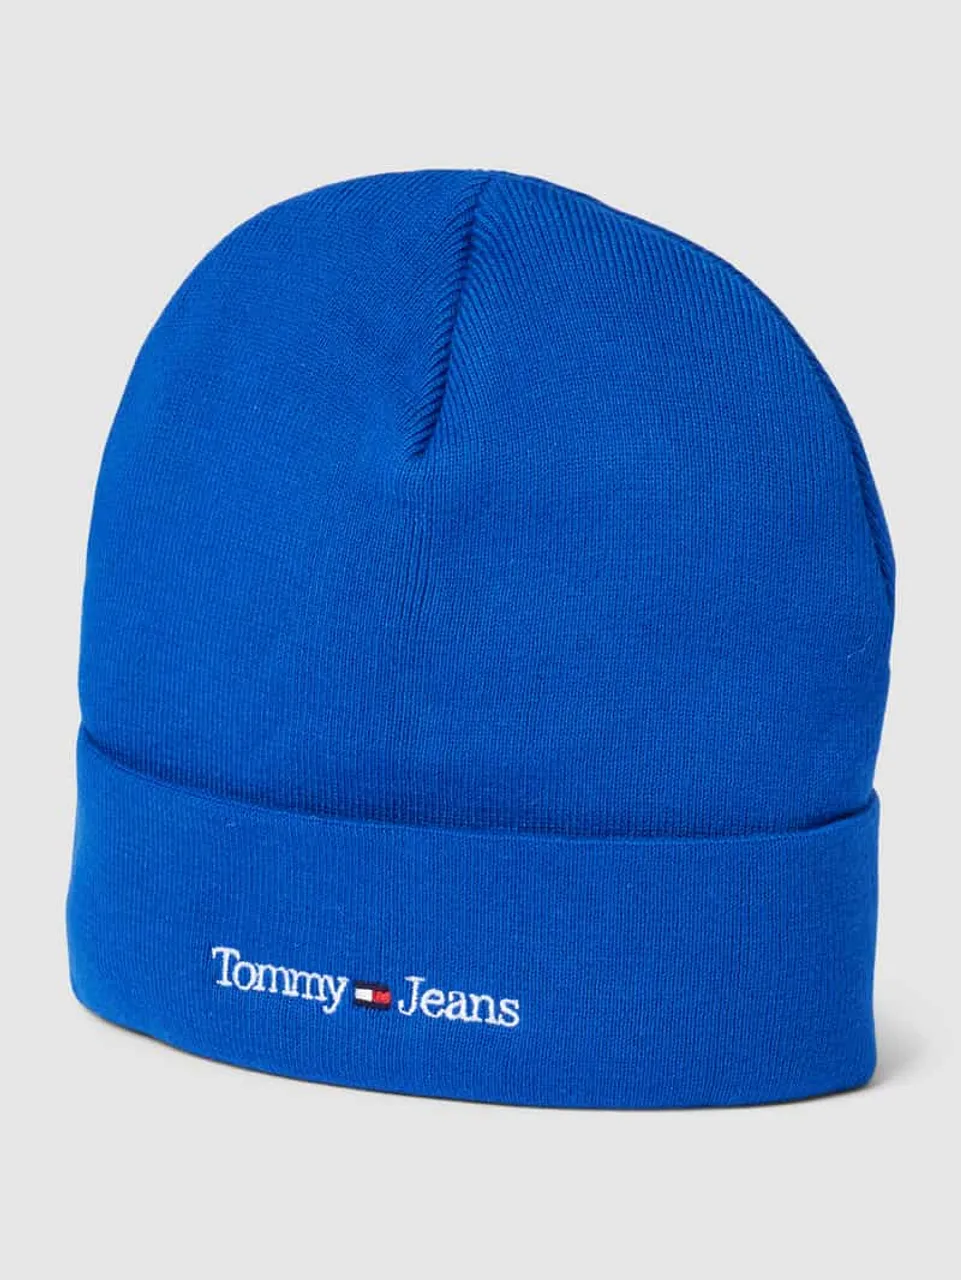 Tommy Jeans Beanie mit Label-Stitching Modell 'SPORT' in Royal